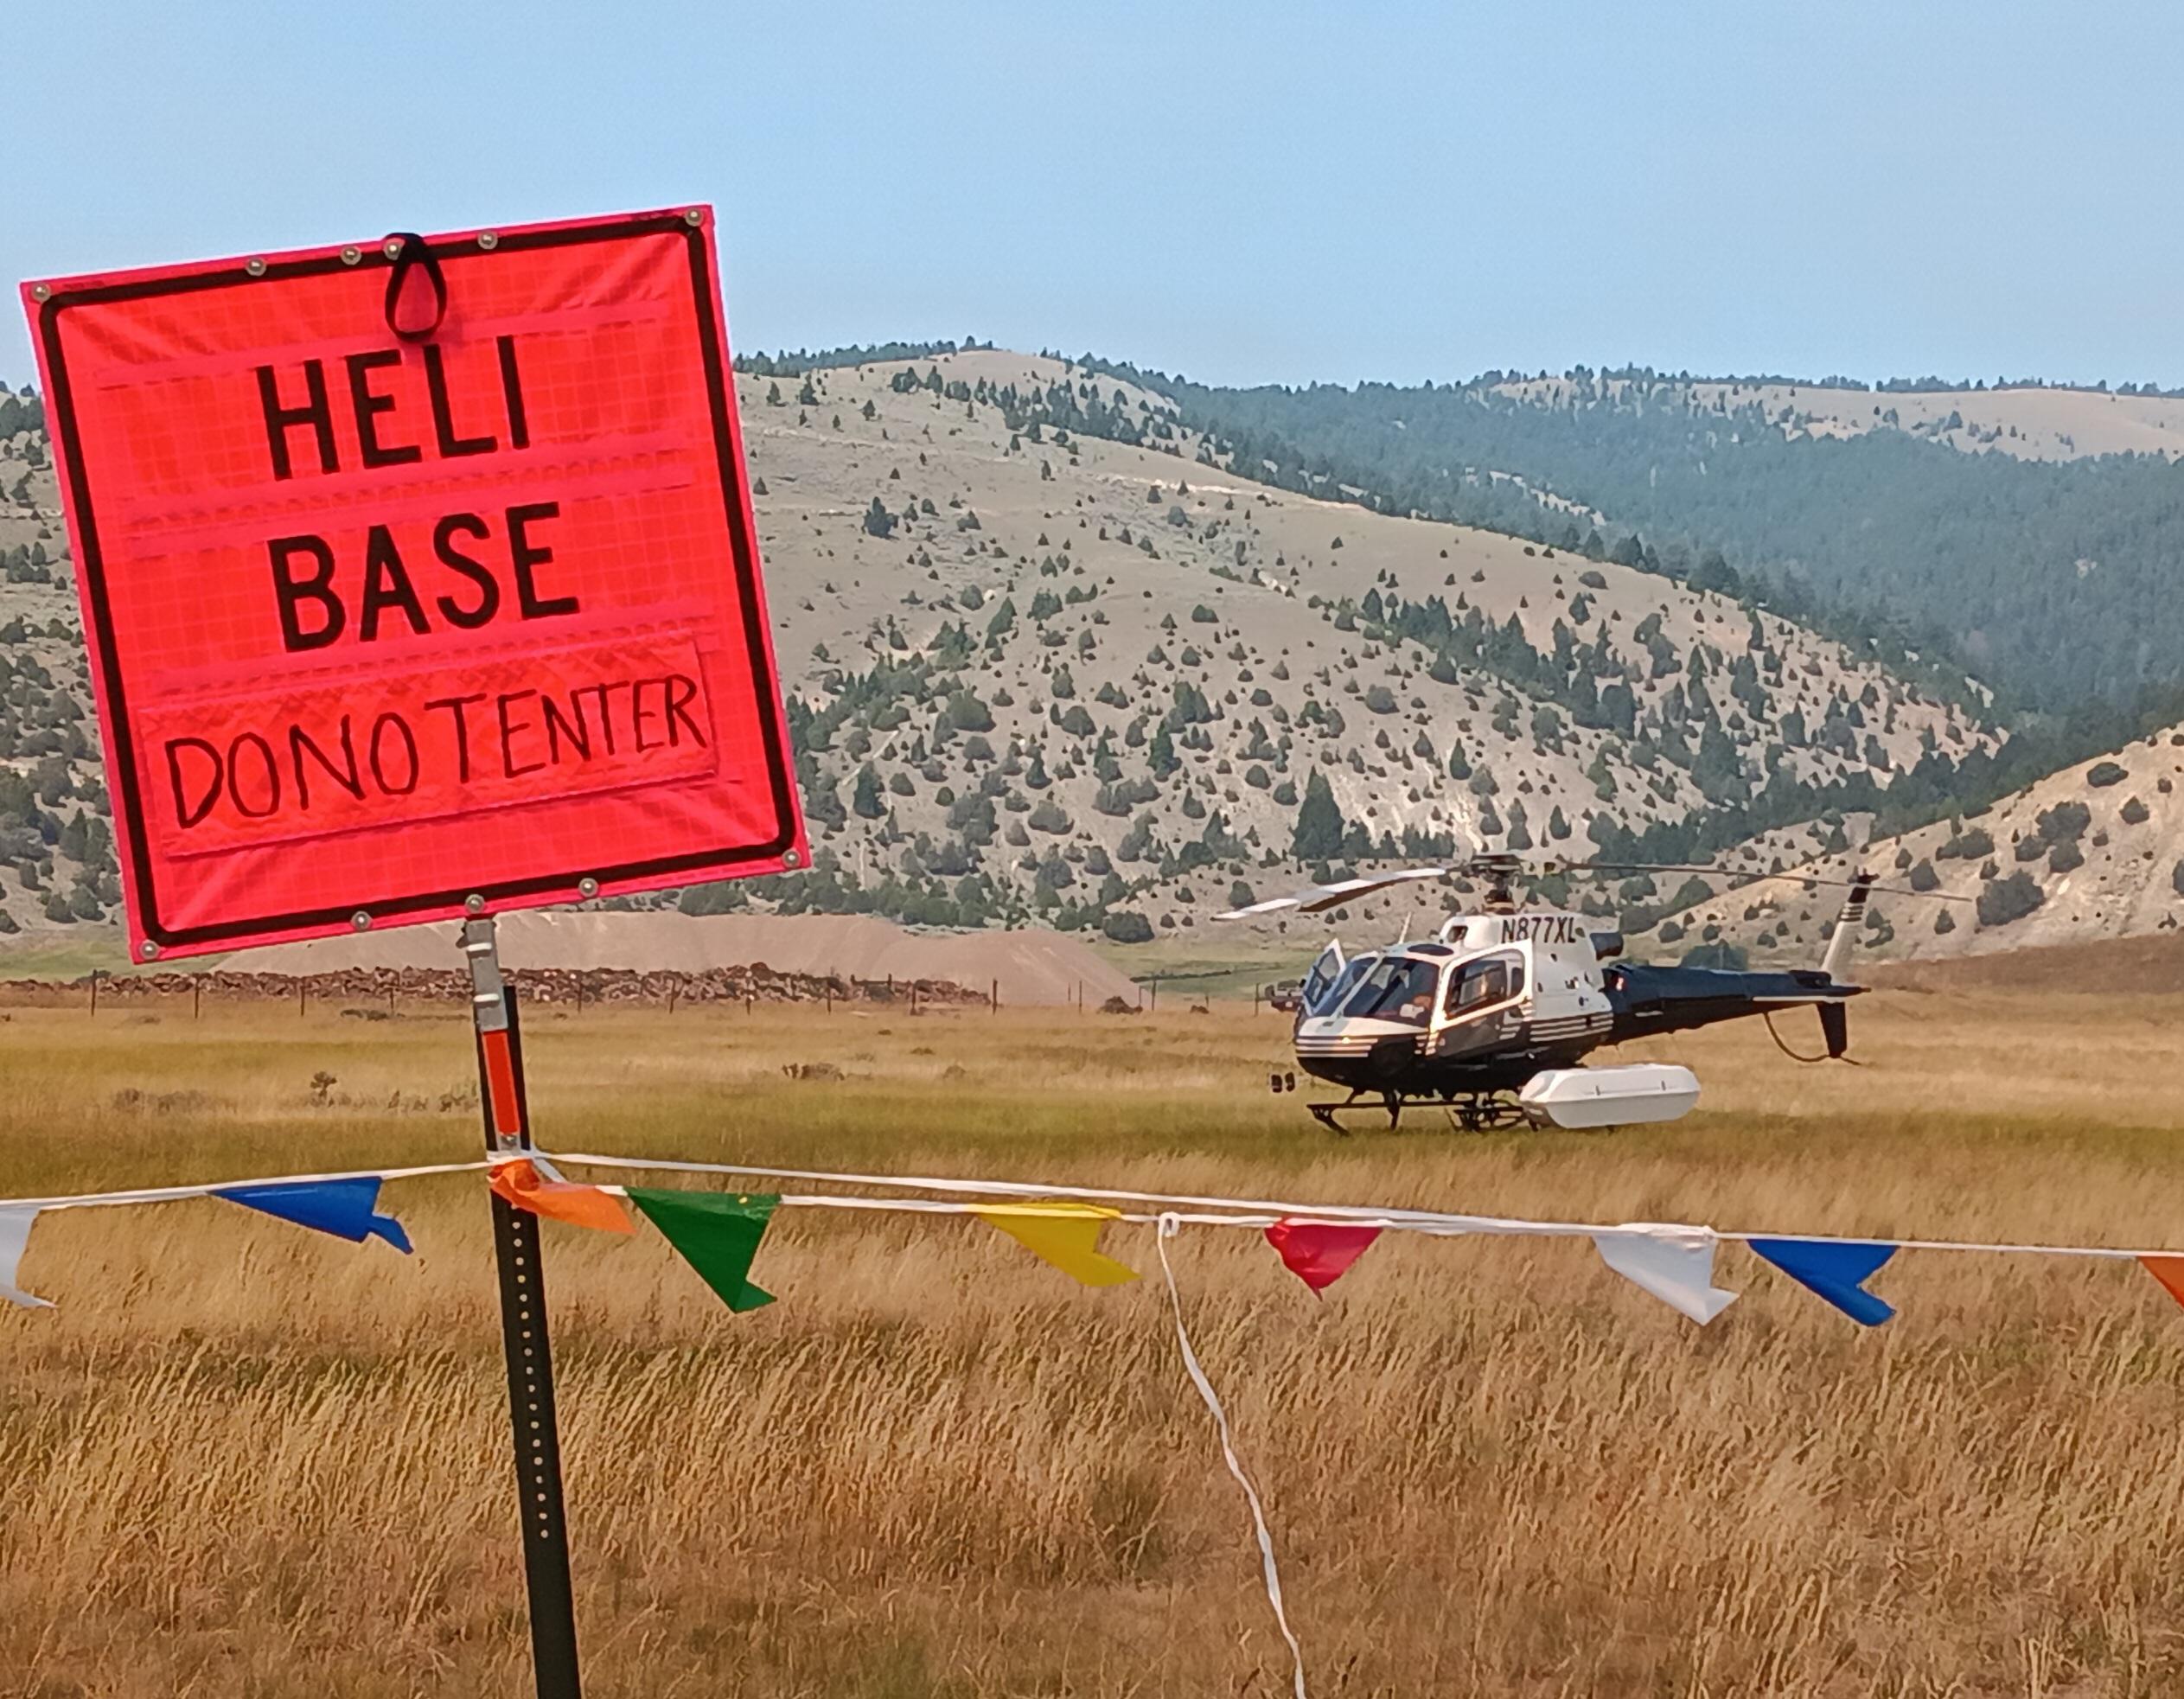 Helibase, as soon from the Bowles Creek Fire ICP. Photo by Sarah Mattson